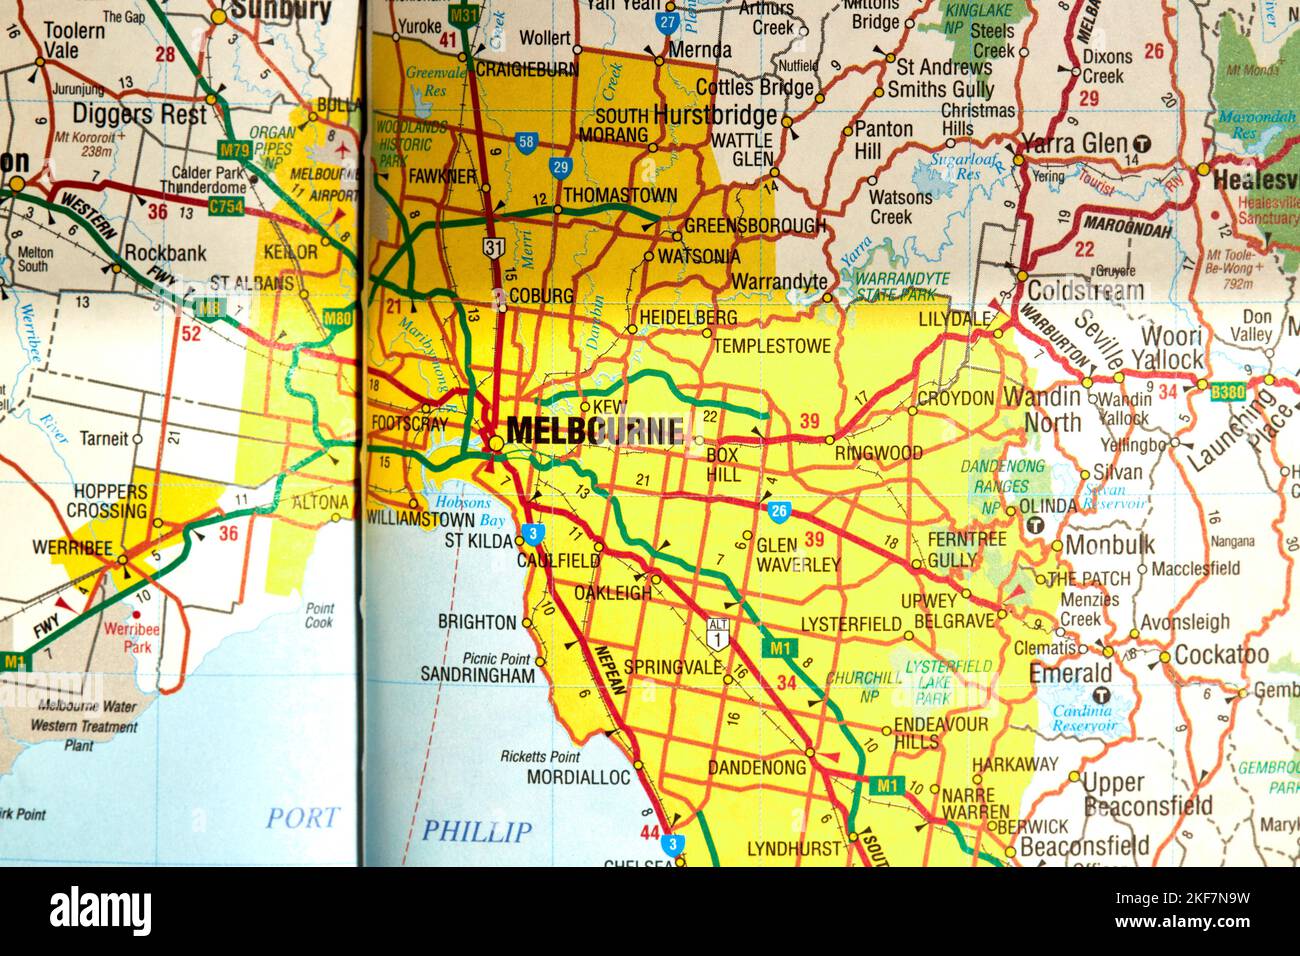 Maps of Australian Cities the old way of travel before GPS! Stock Photo